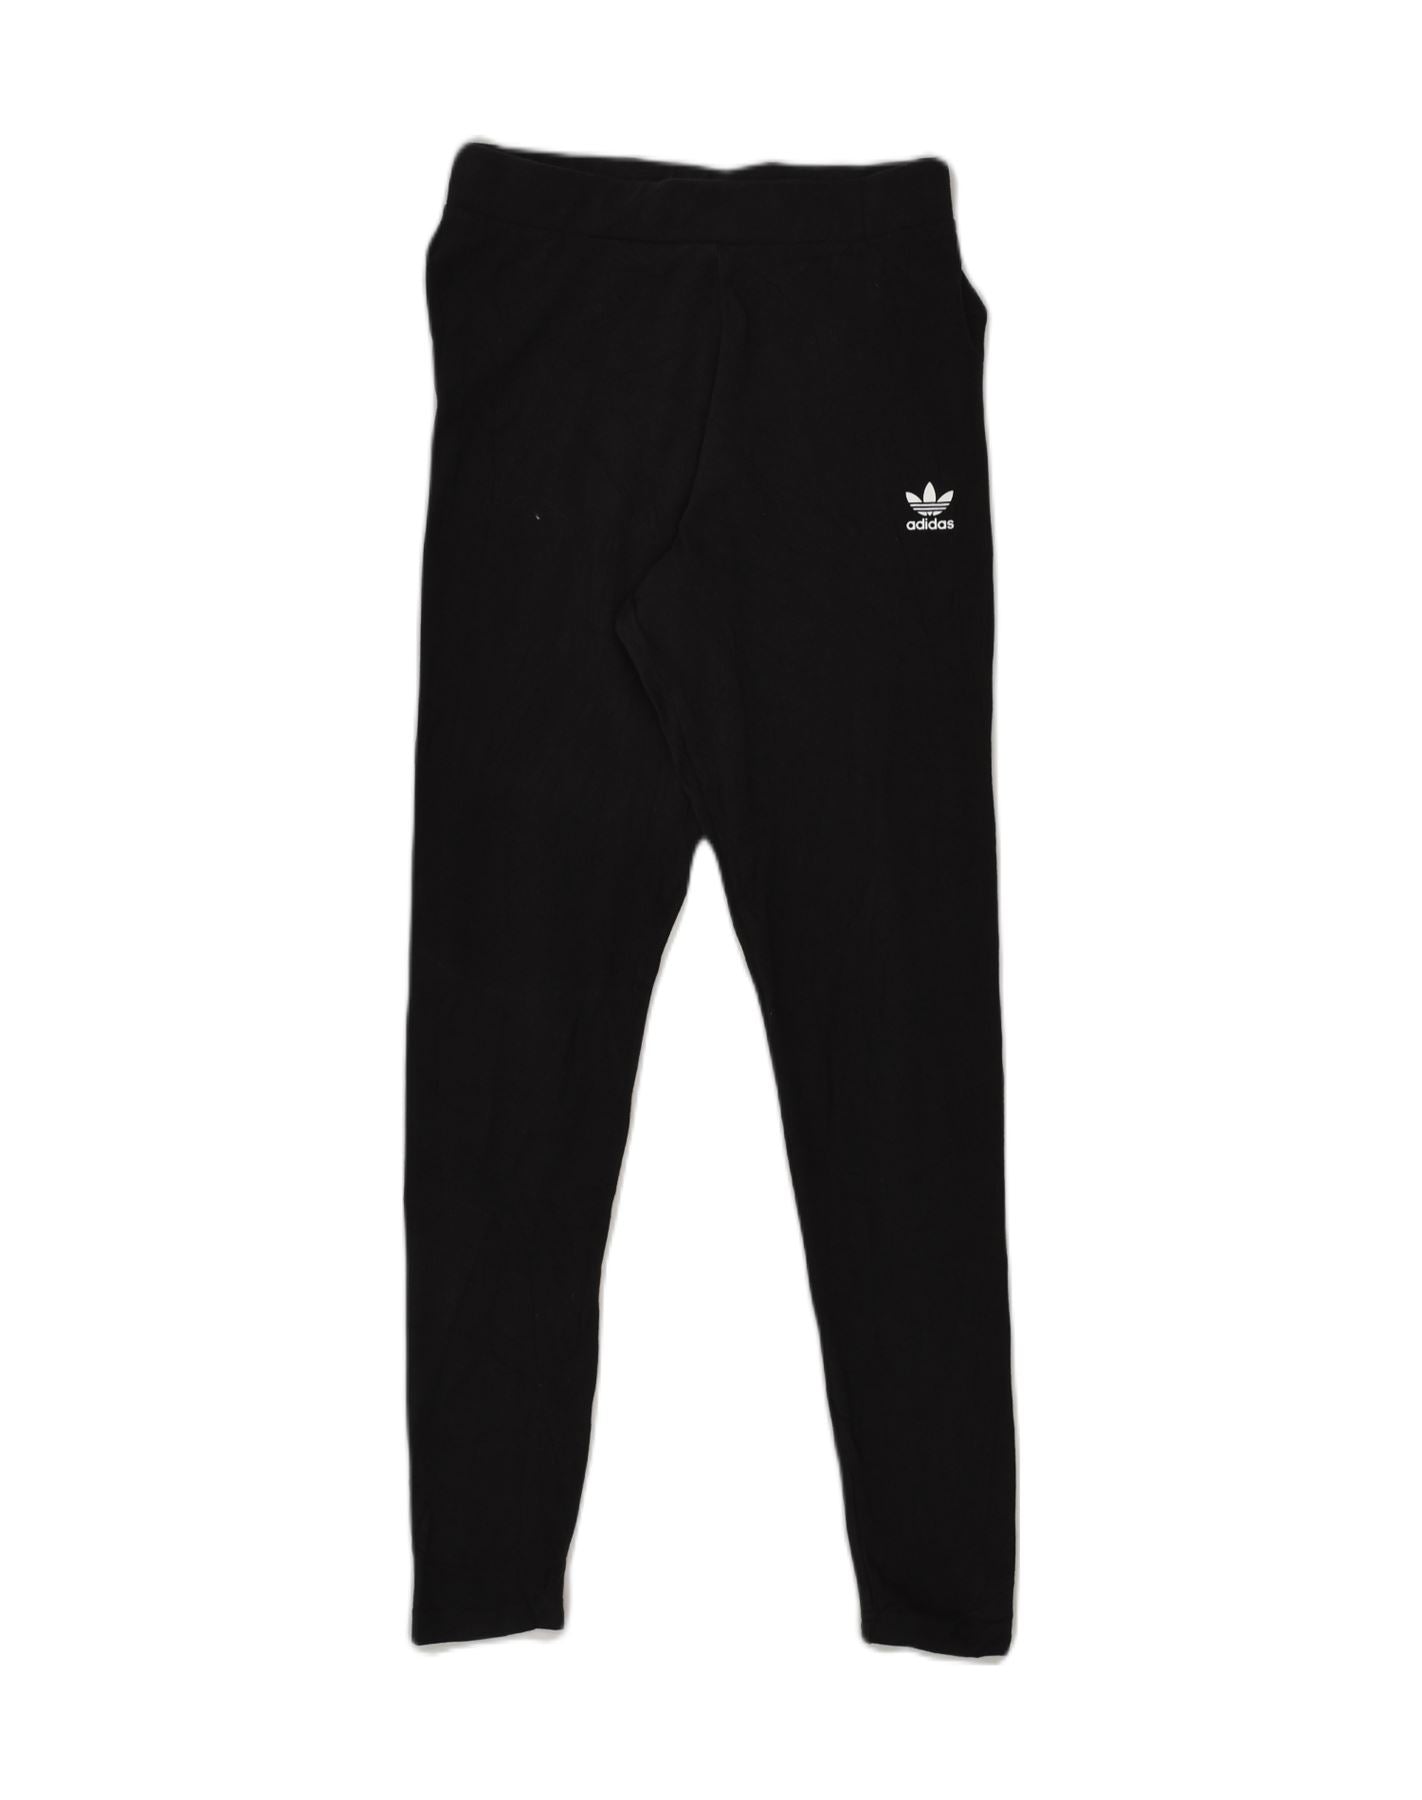 ADIDAS Womens Leggings UK 8 Small Black Cotton, Vintage & Second-Hand  Clothing Online